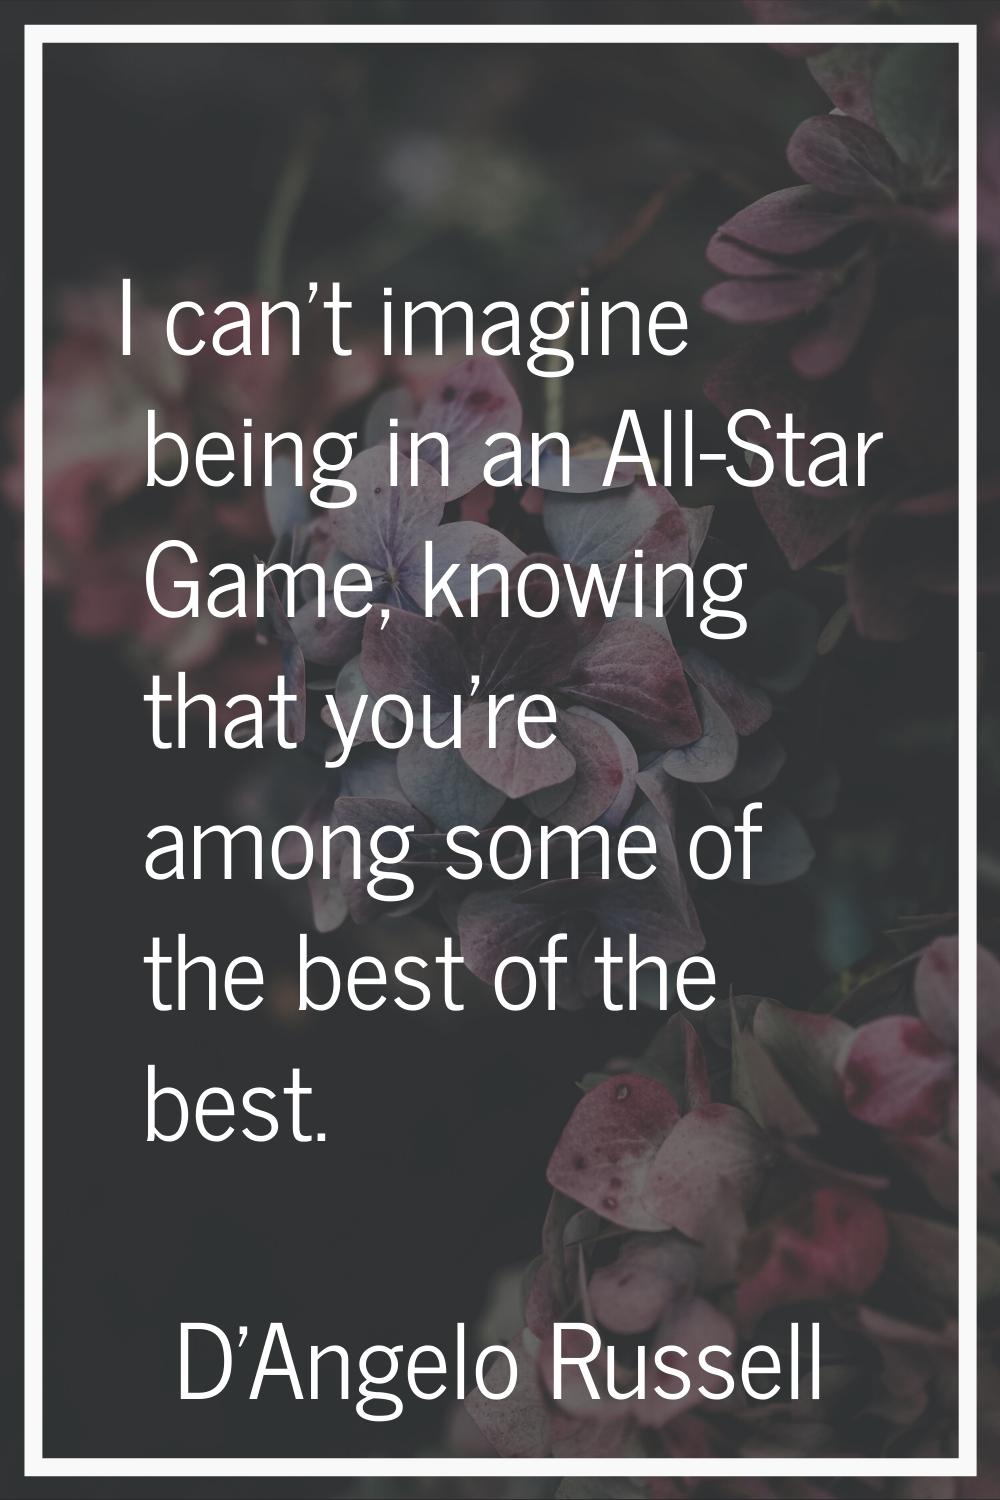 I can't imagine being in an All-Star Game, knowing that you're among some of the best of the best.